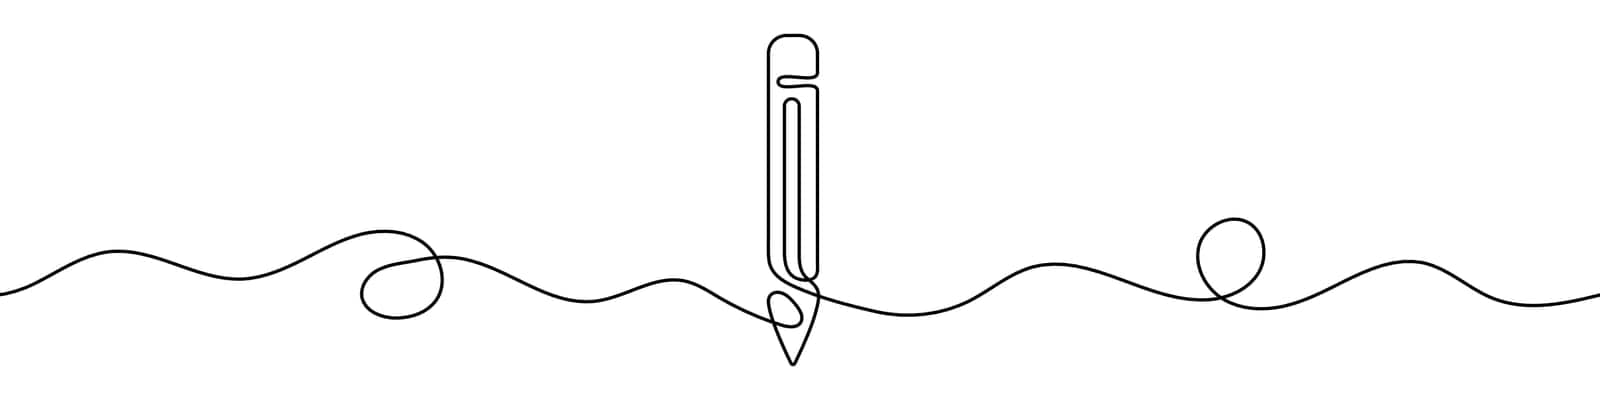 Continuous editable drawing of pencil. One line drawing background. Vector illustration. Pencil icon in one line style.